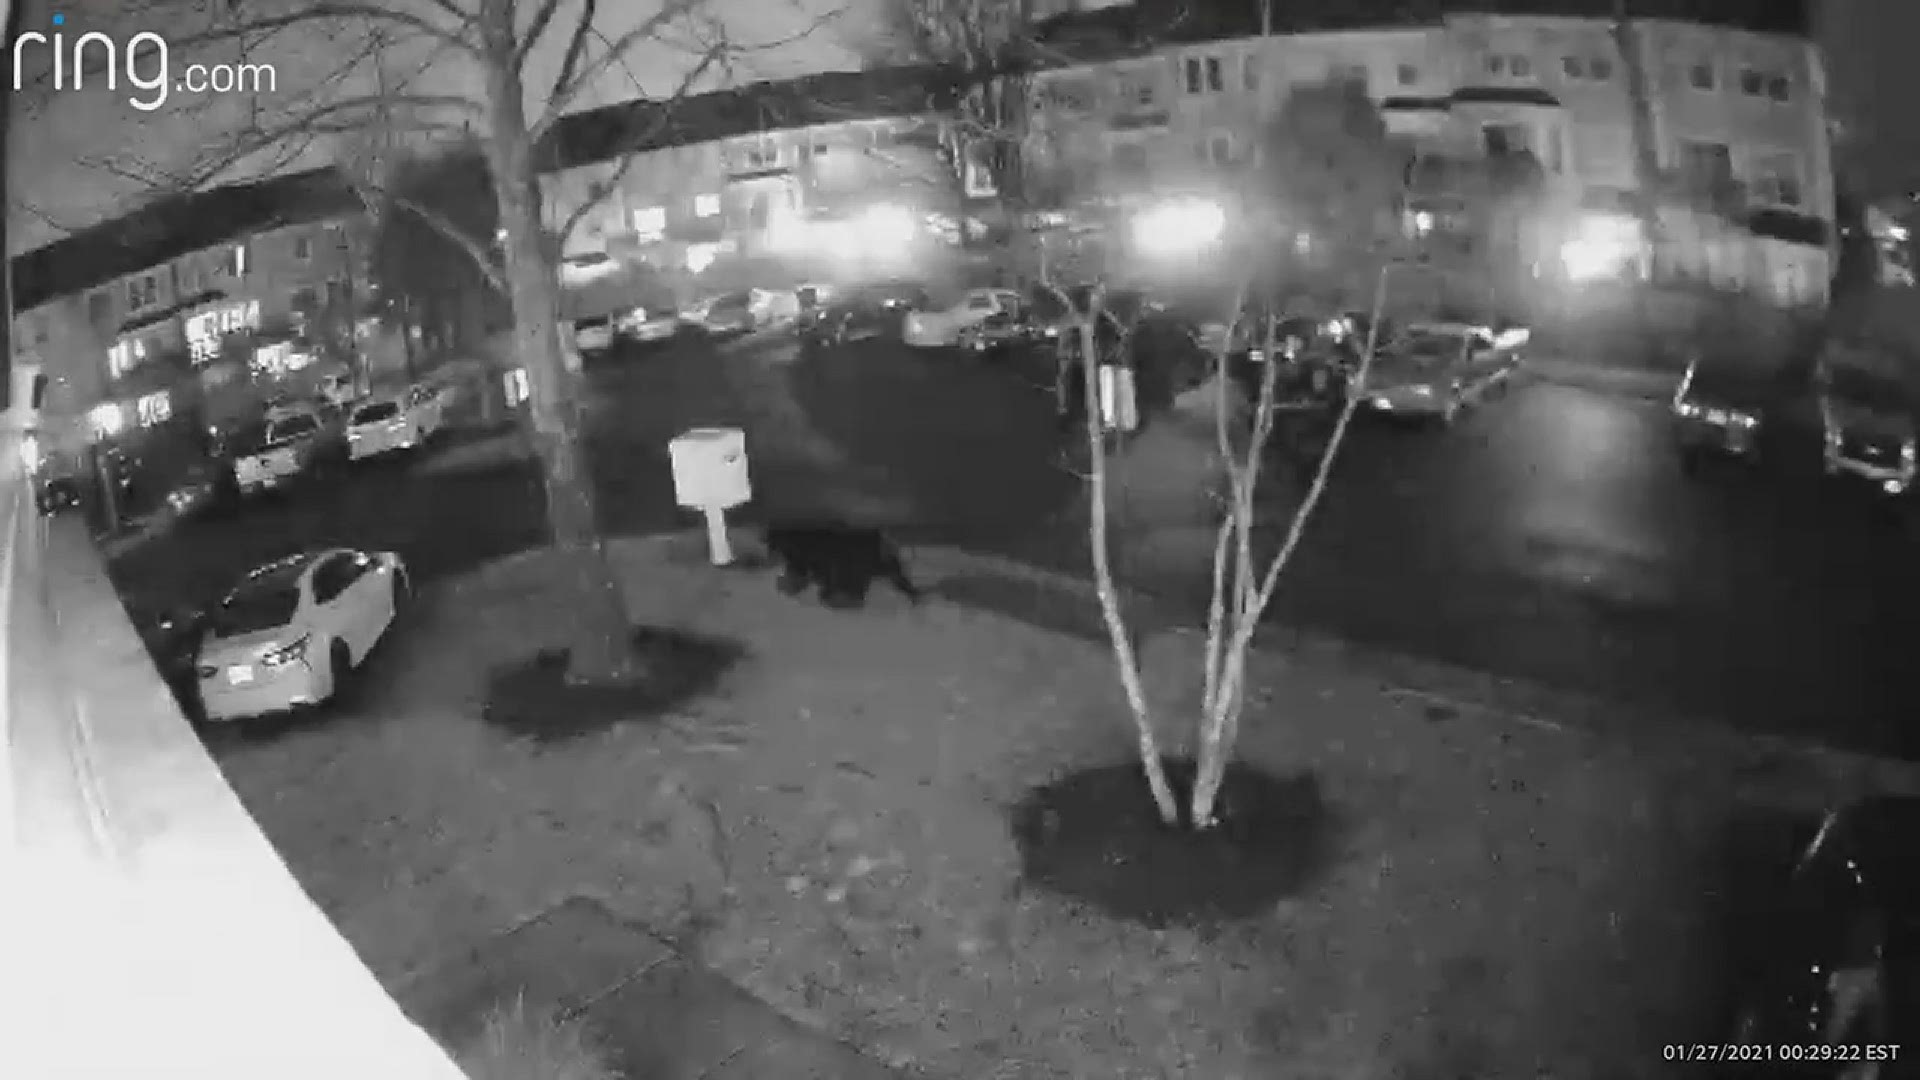 A bear was sighted in Ashburn, Va., around Bar Harbor Terrace and Brookview Square.